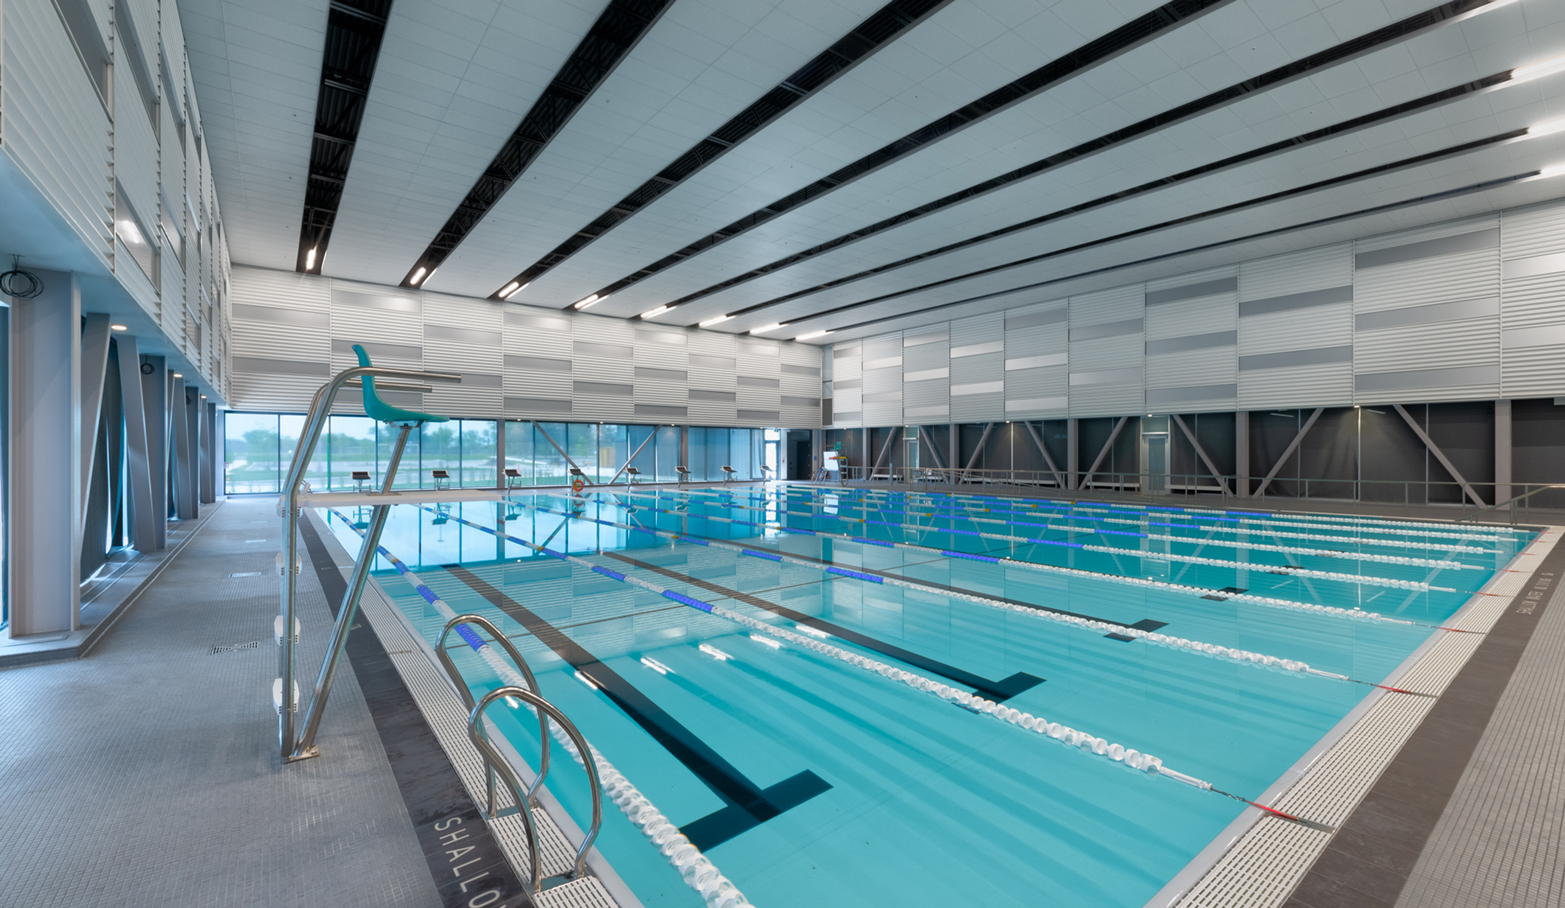 Interior view of the competition pool at University of Windsor Toldo Lancer Centre.